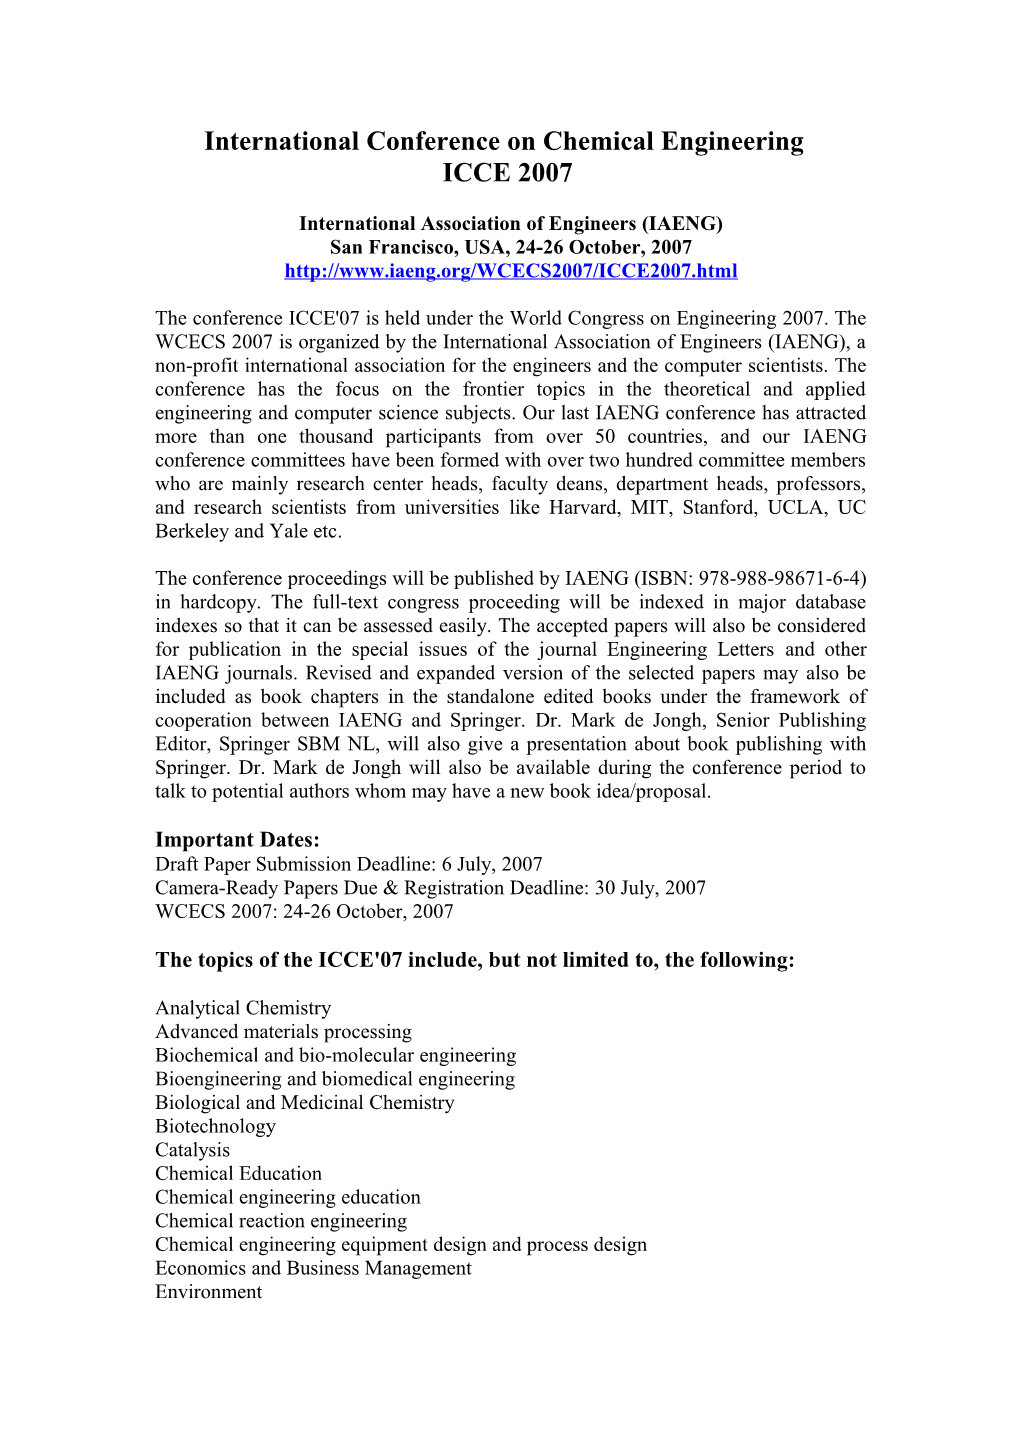 Call for Papers: World Congress on Engineering and Computer Science WCECS 2007